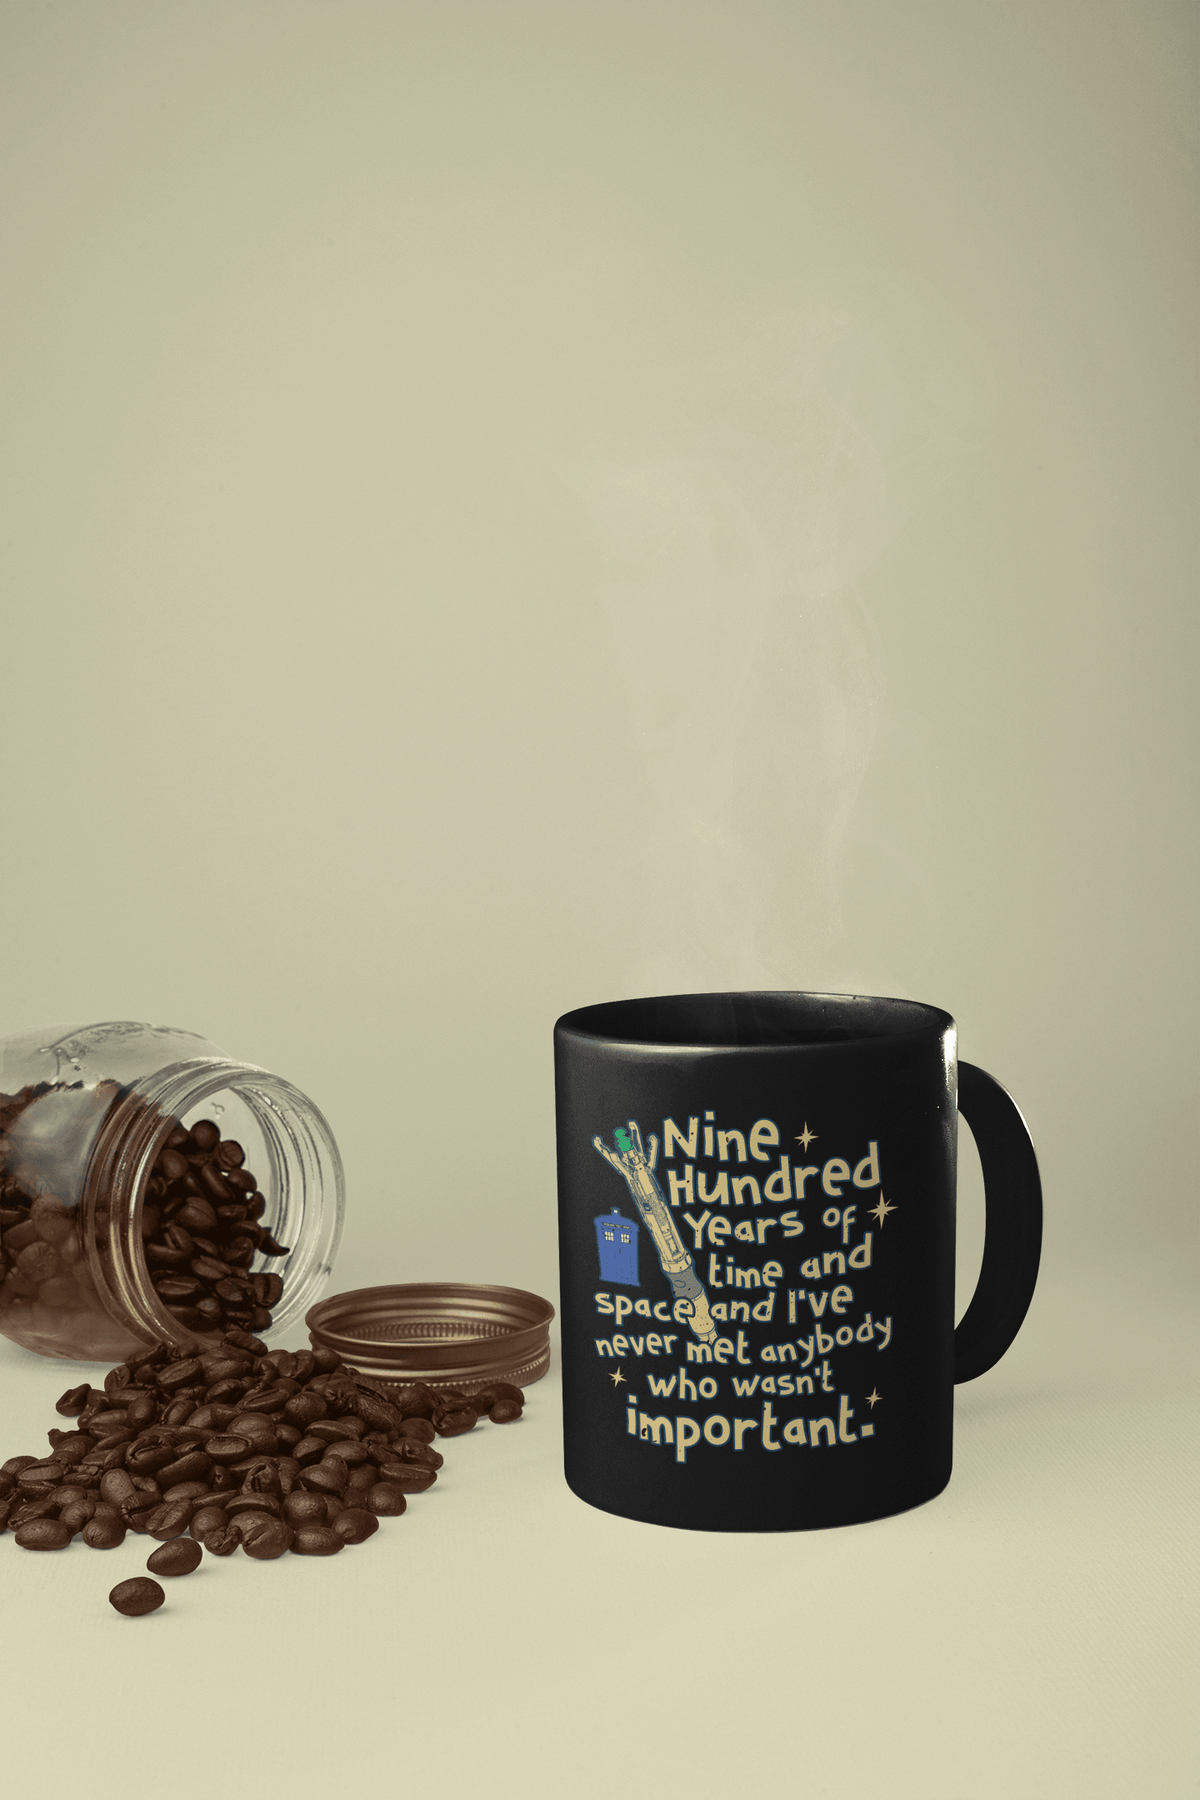 Designs by MyUtopia Shout Out:Doctor Who TARDIS 900 Years of Time and Space Ceramic Coffee Mug - Black,11 oz / Black,Ceramic Coffee Mug